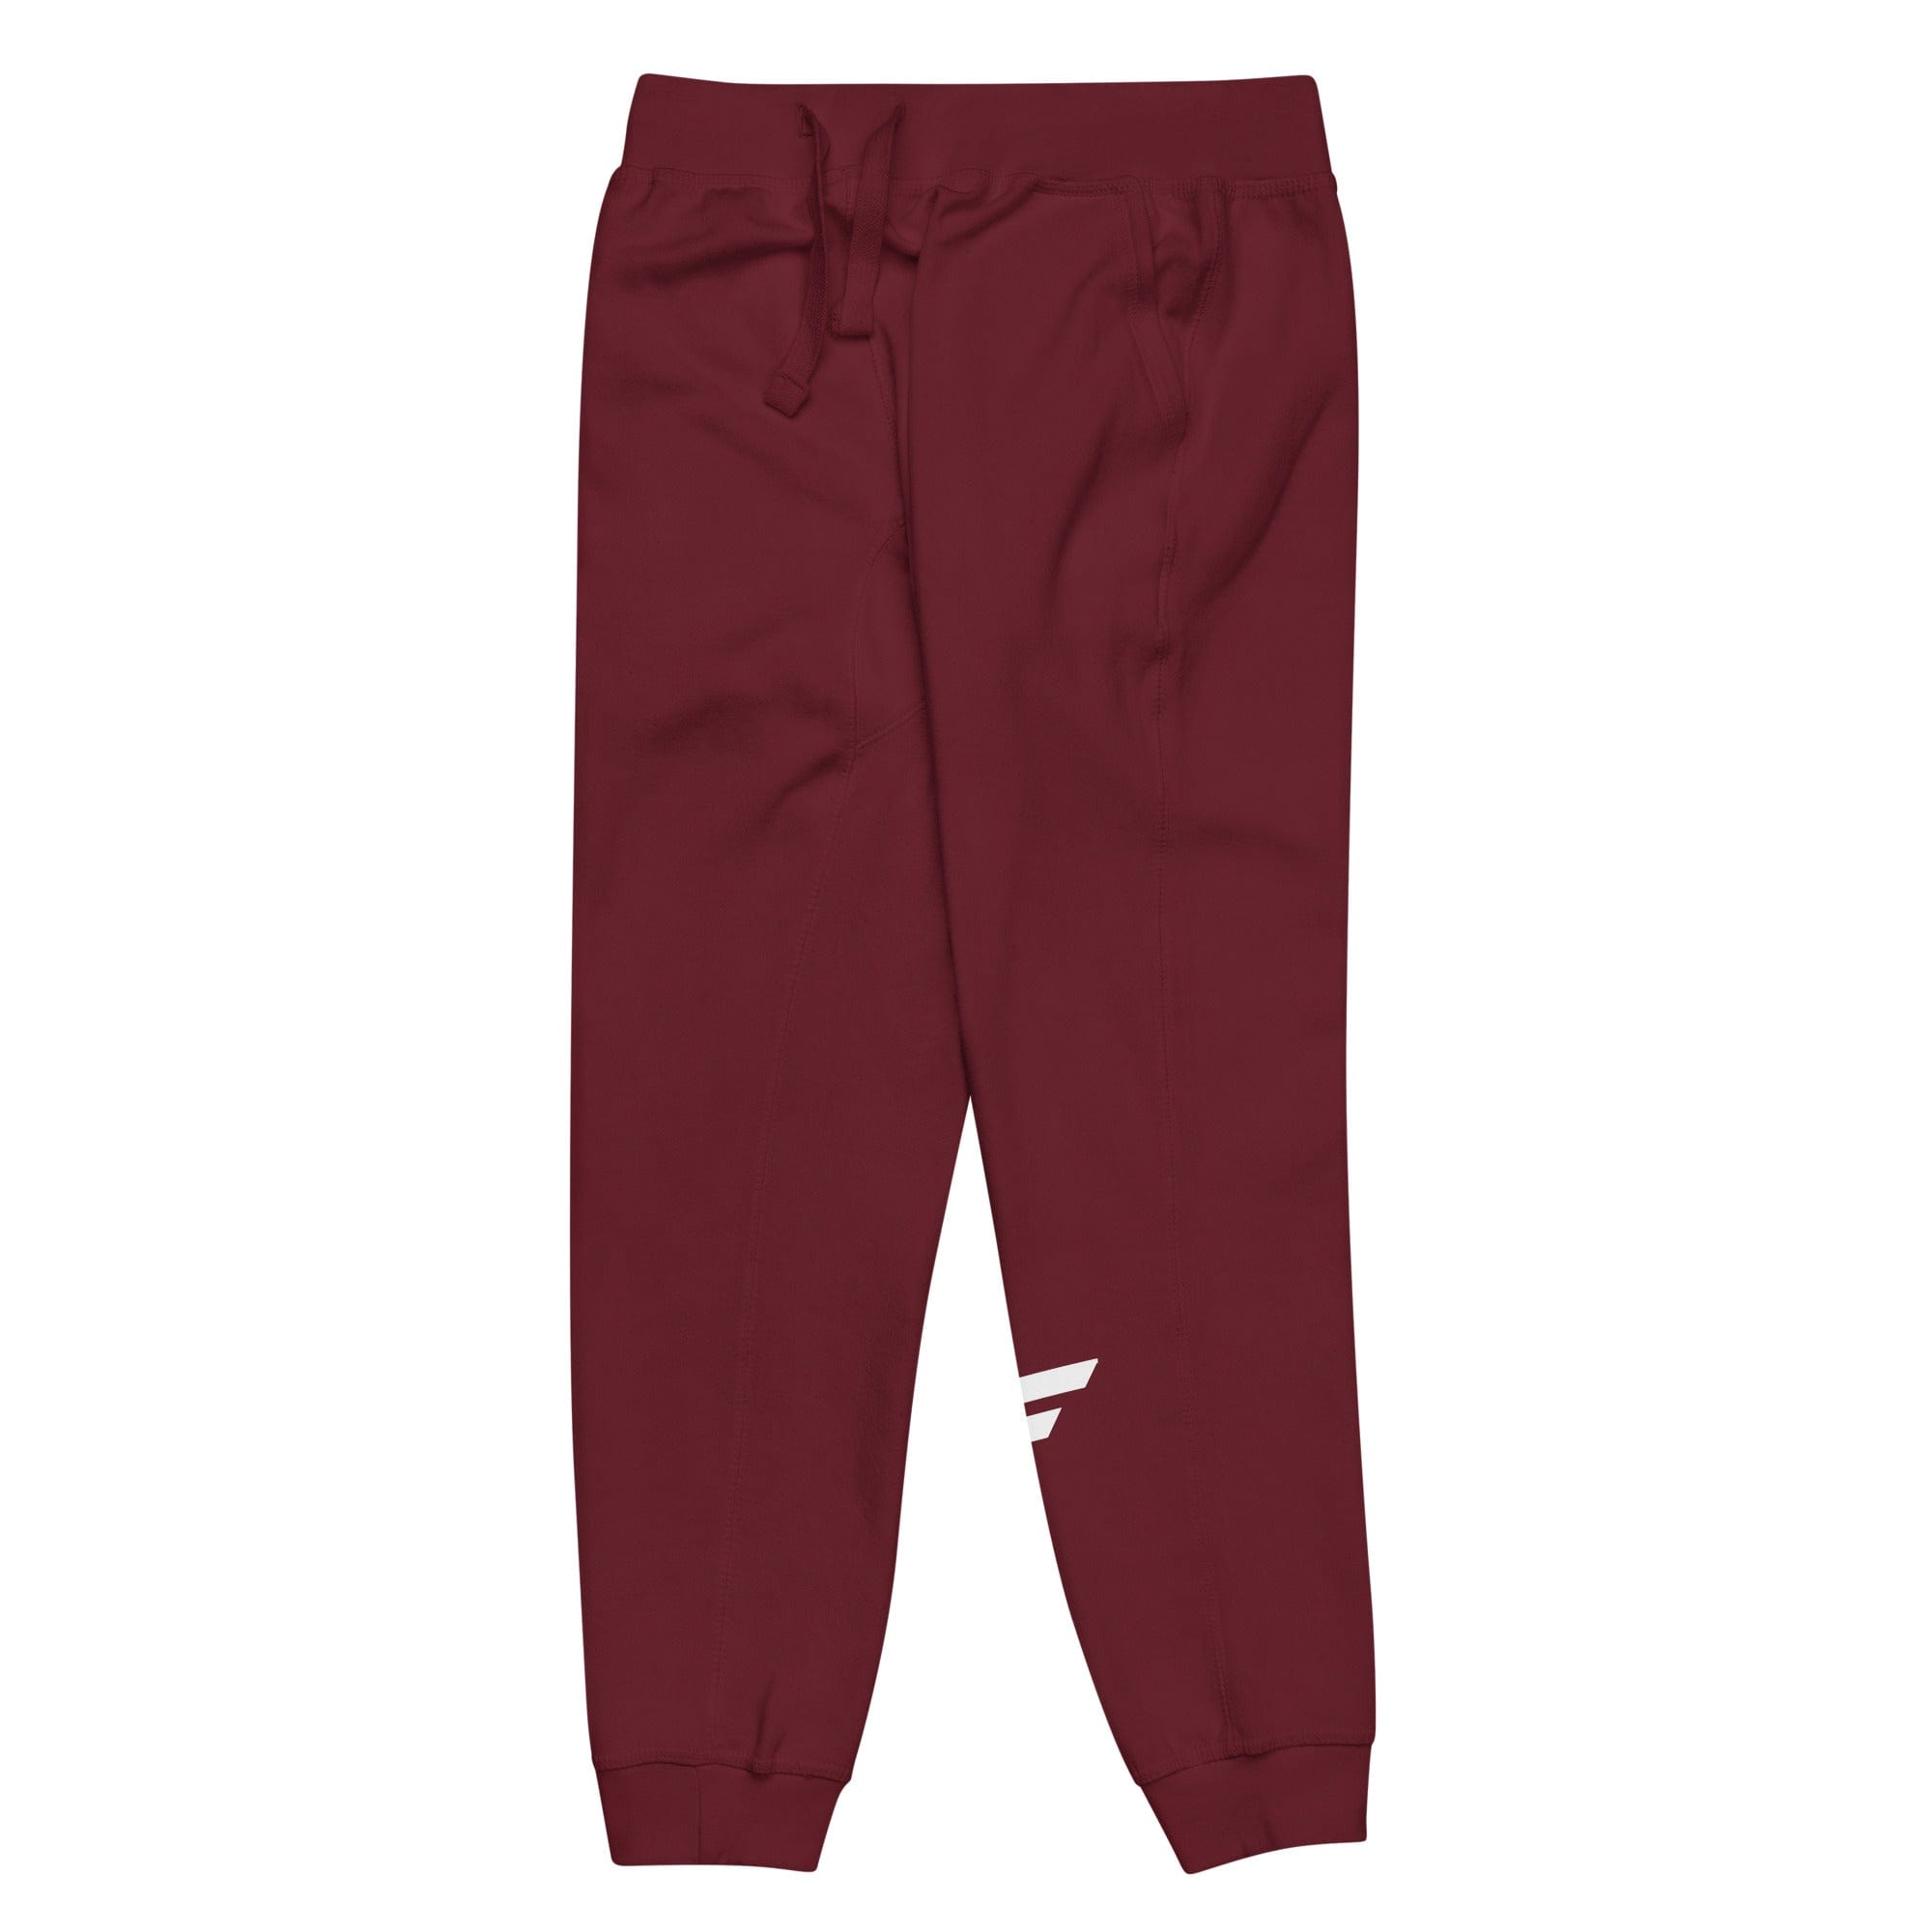 Maroon unisex joggers with Fire Cornhole F logo in white